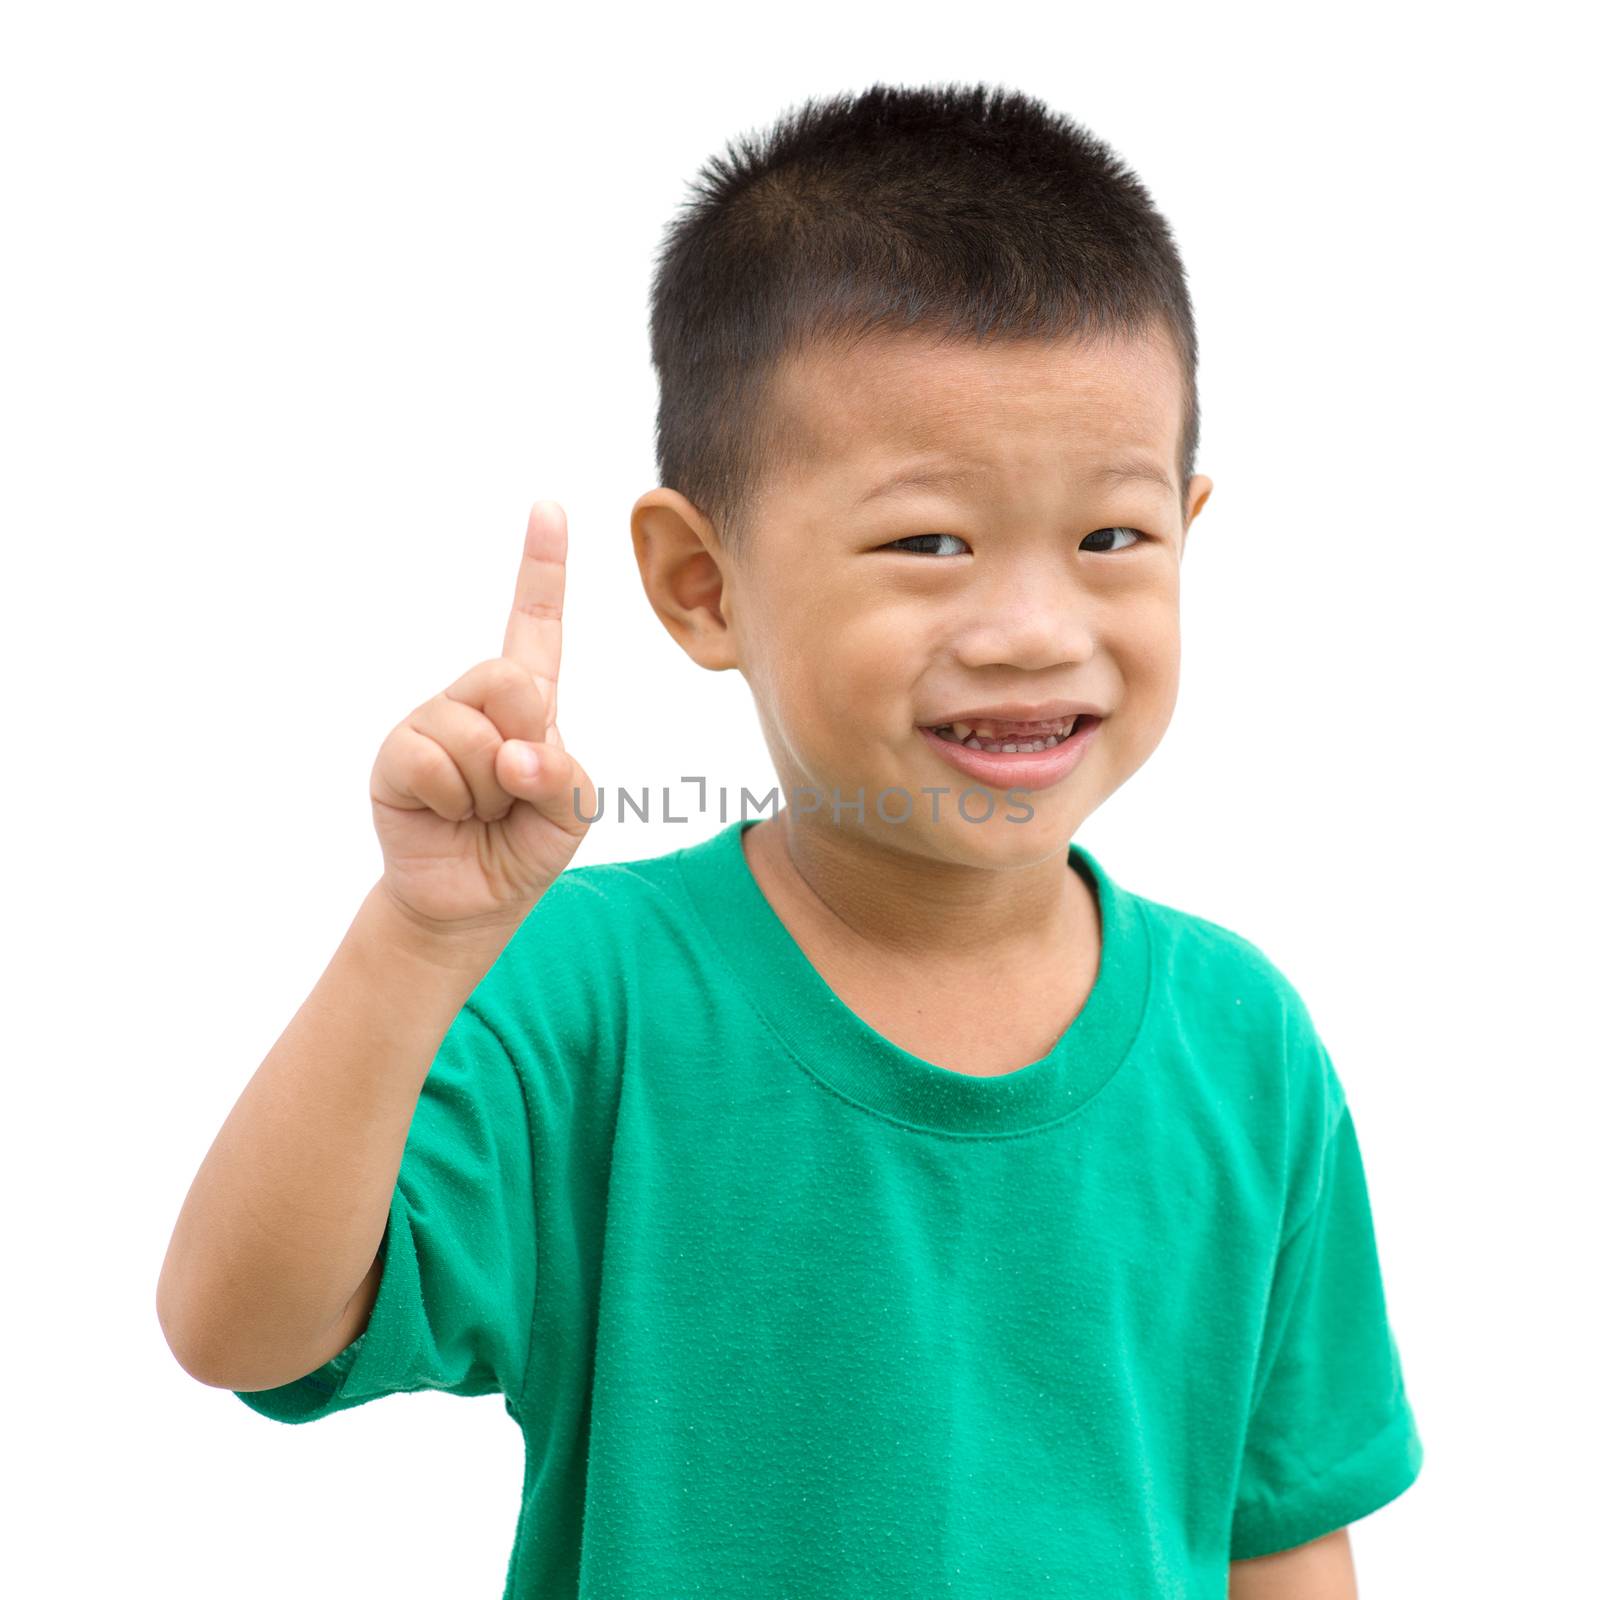 Asian child giving thumb up. Portrait of young boy isolated on white background.